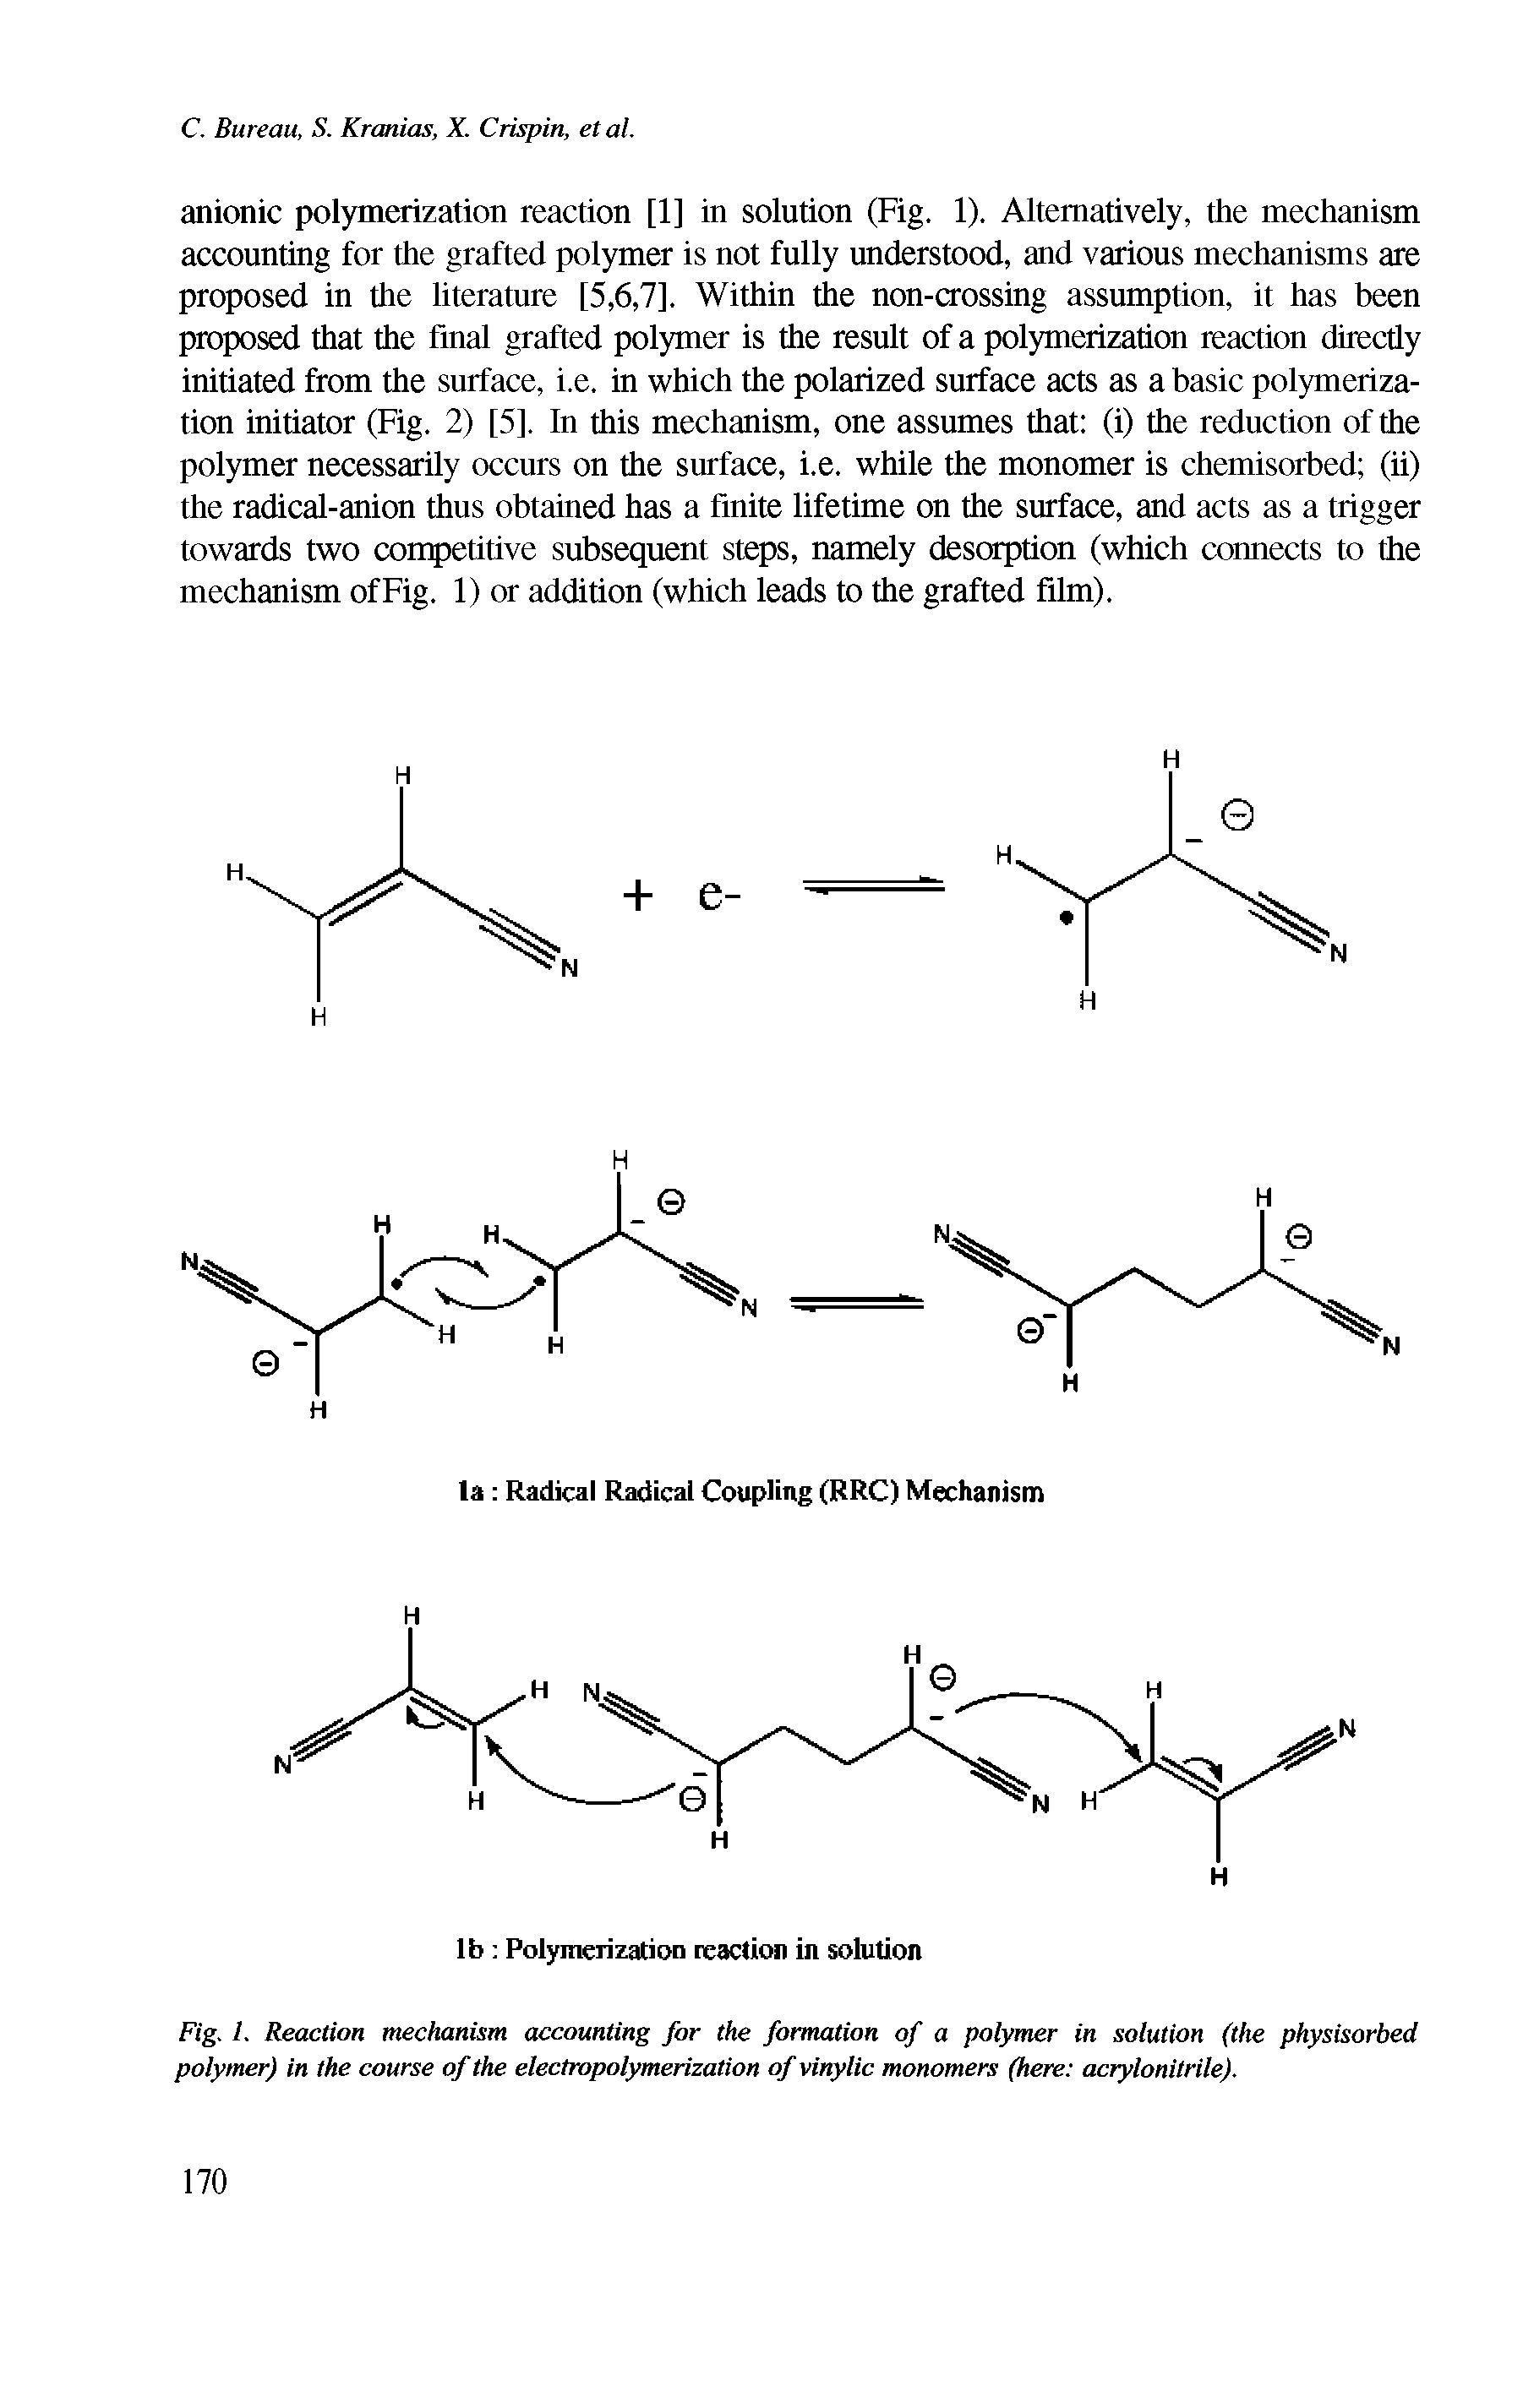 Fig. I. Reaction mechanism accounting for the formation of a polymer in solution (the physisorbed polymer) in the course of the electropolymerization of vinylic monomers (here acrylonitrile).